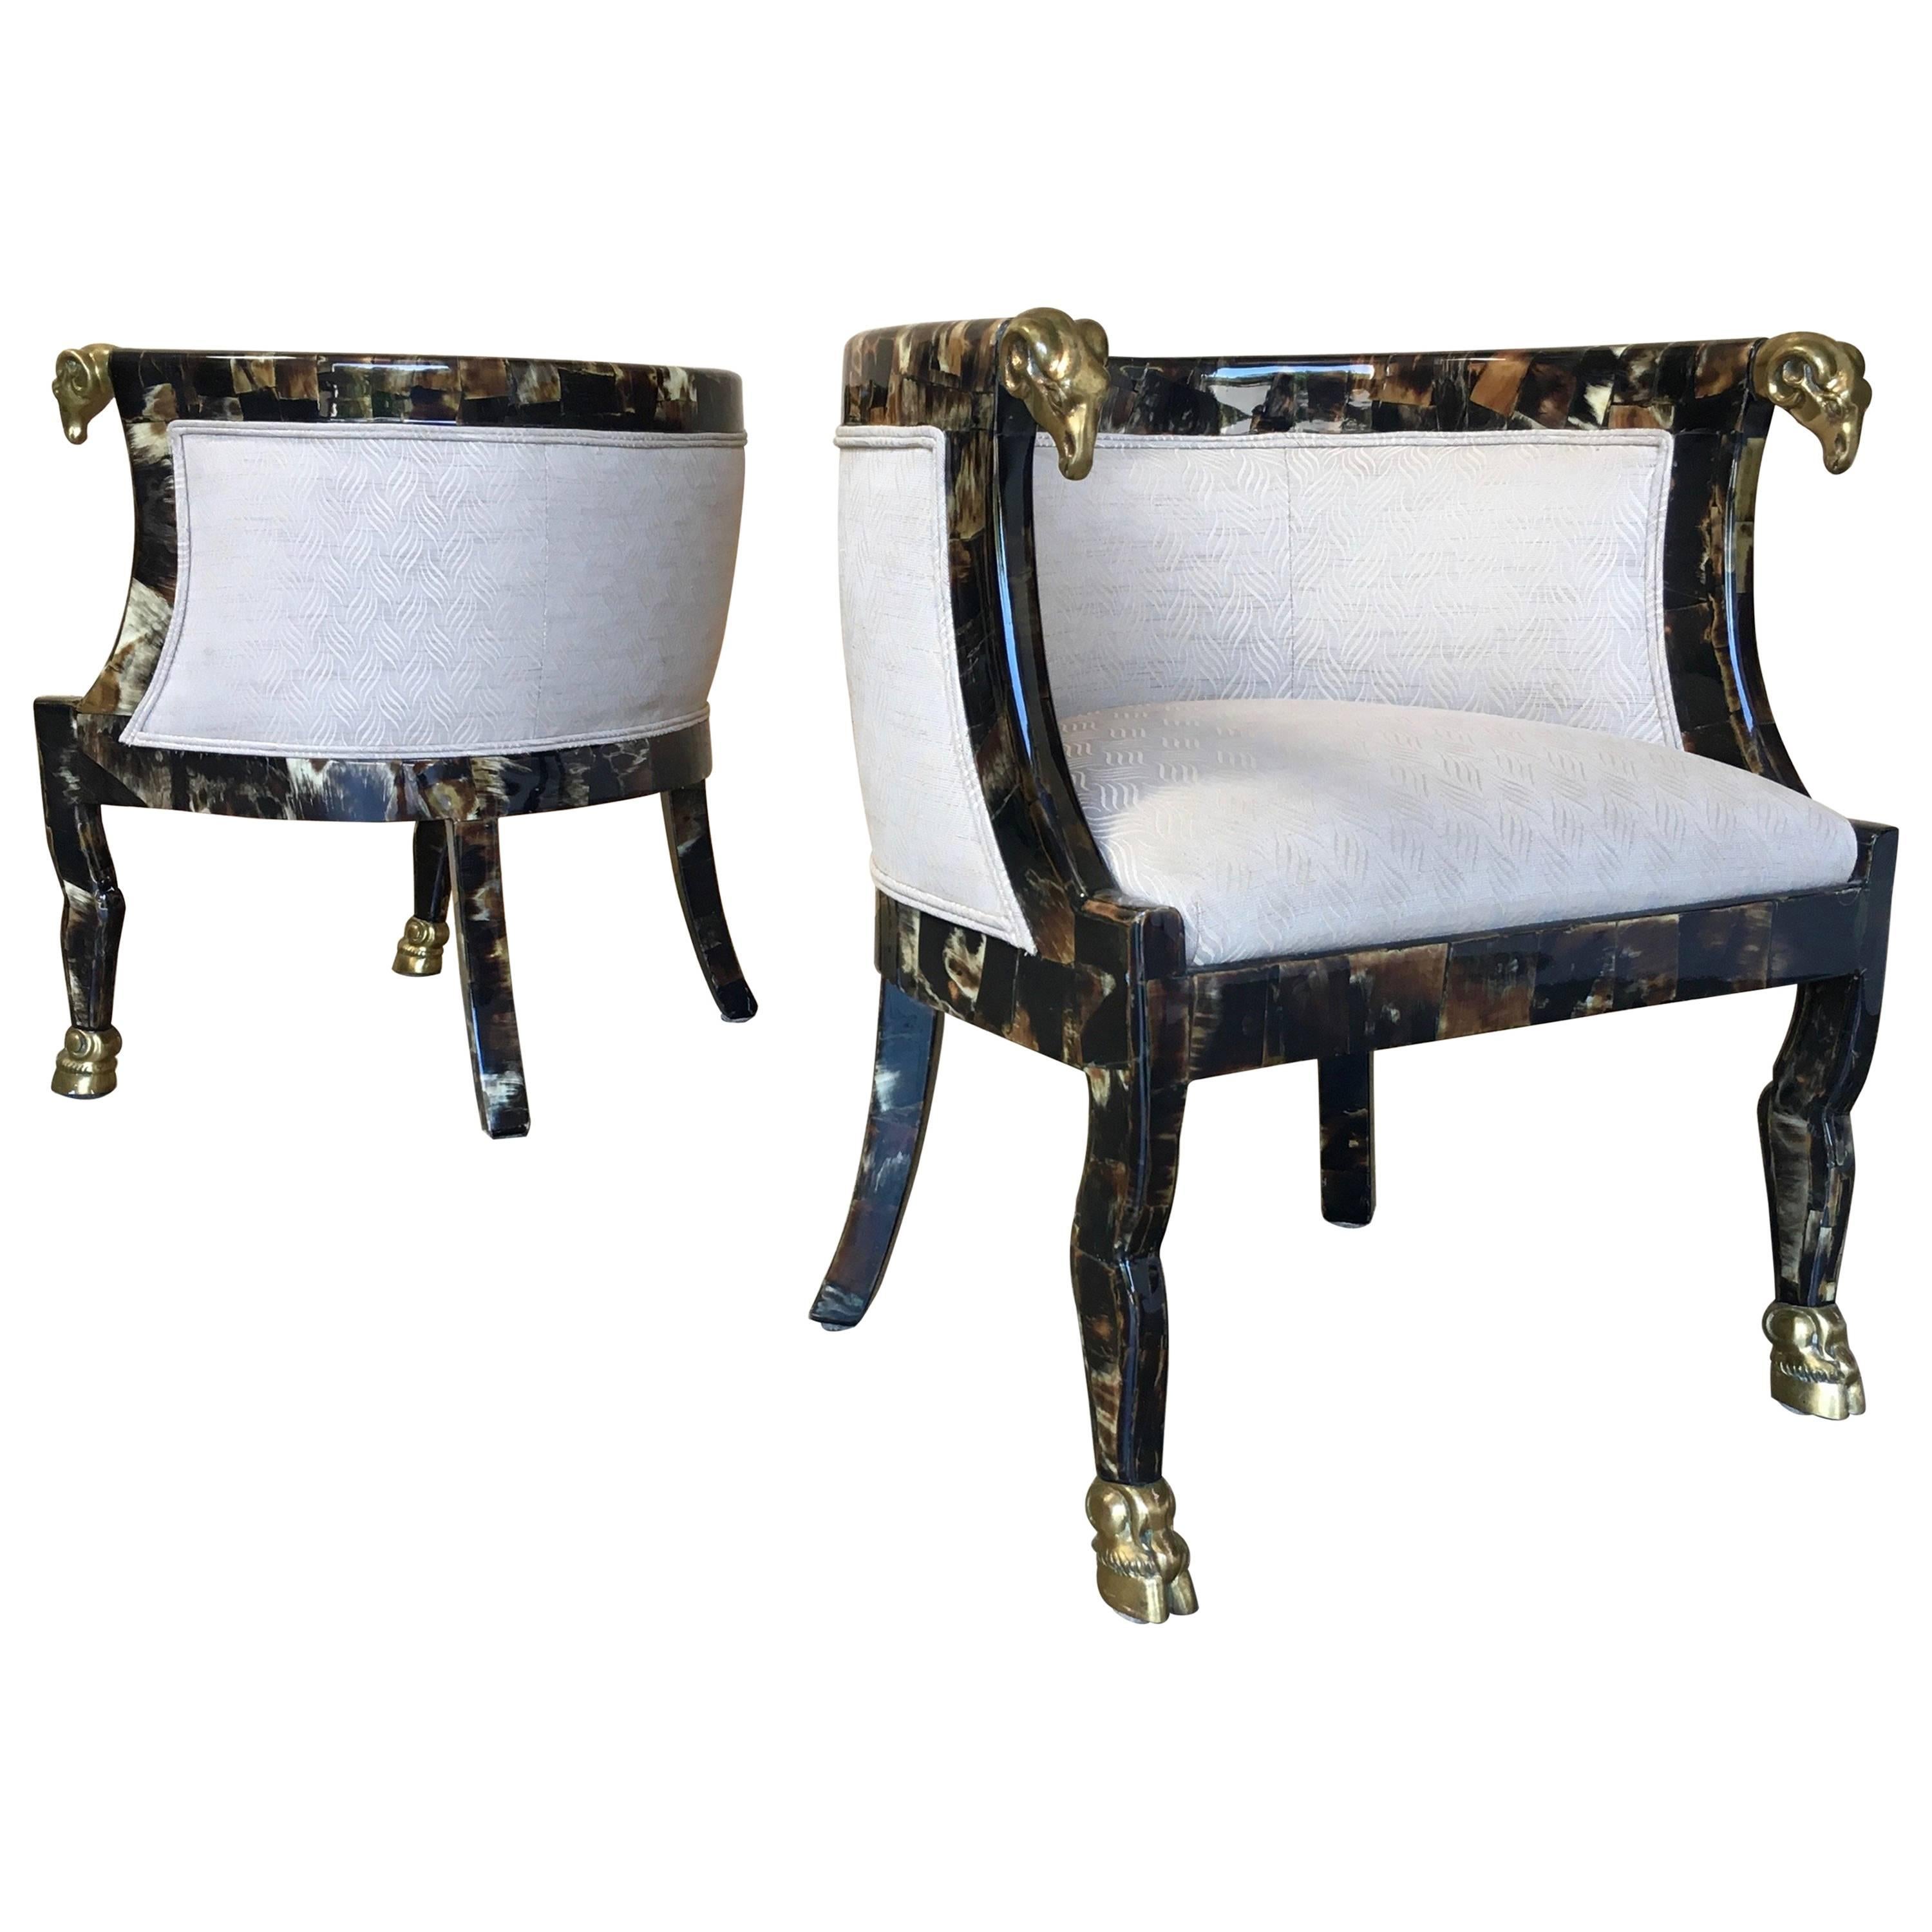 Pair of Steer Horn Covered Barrel Chairs with Brass Ram Heads